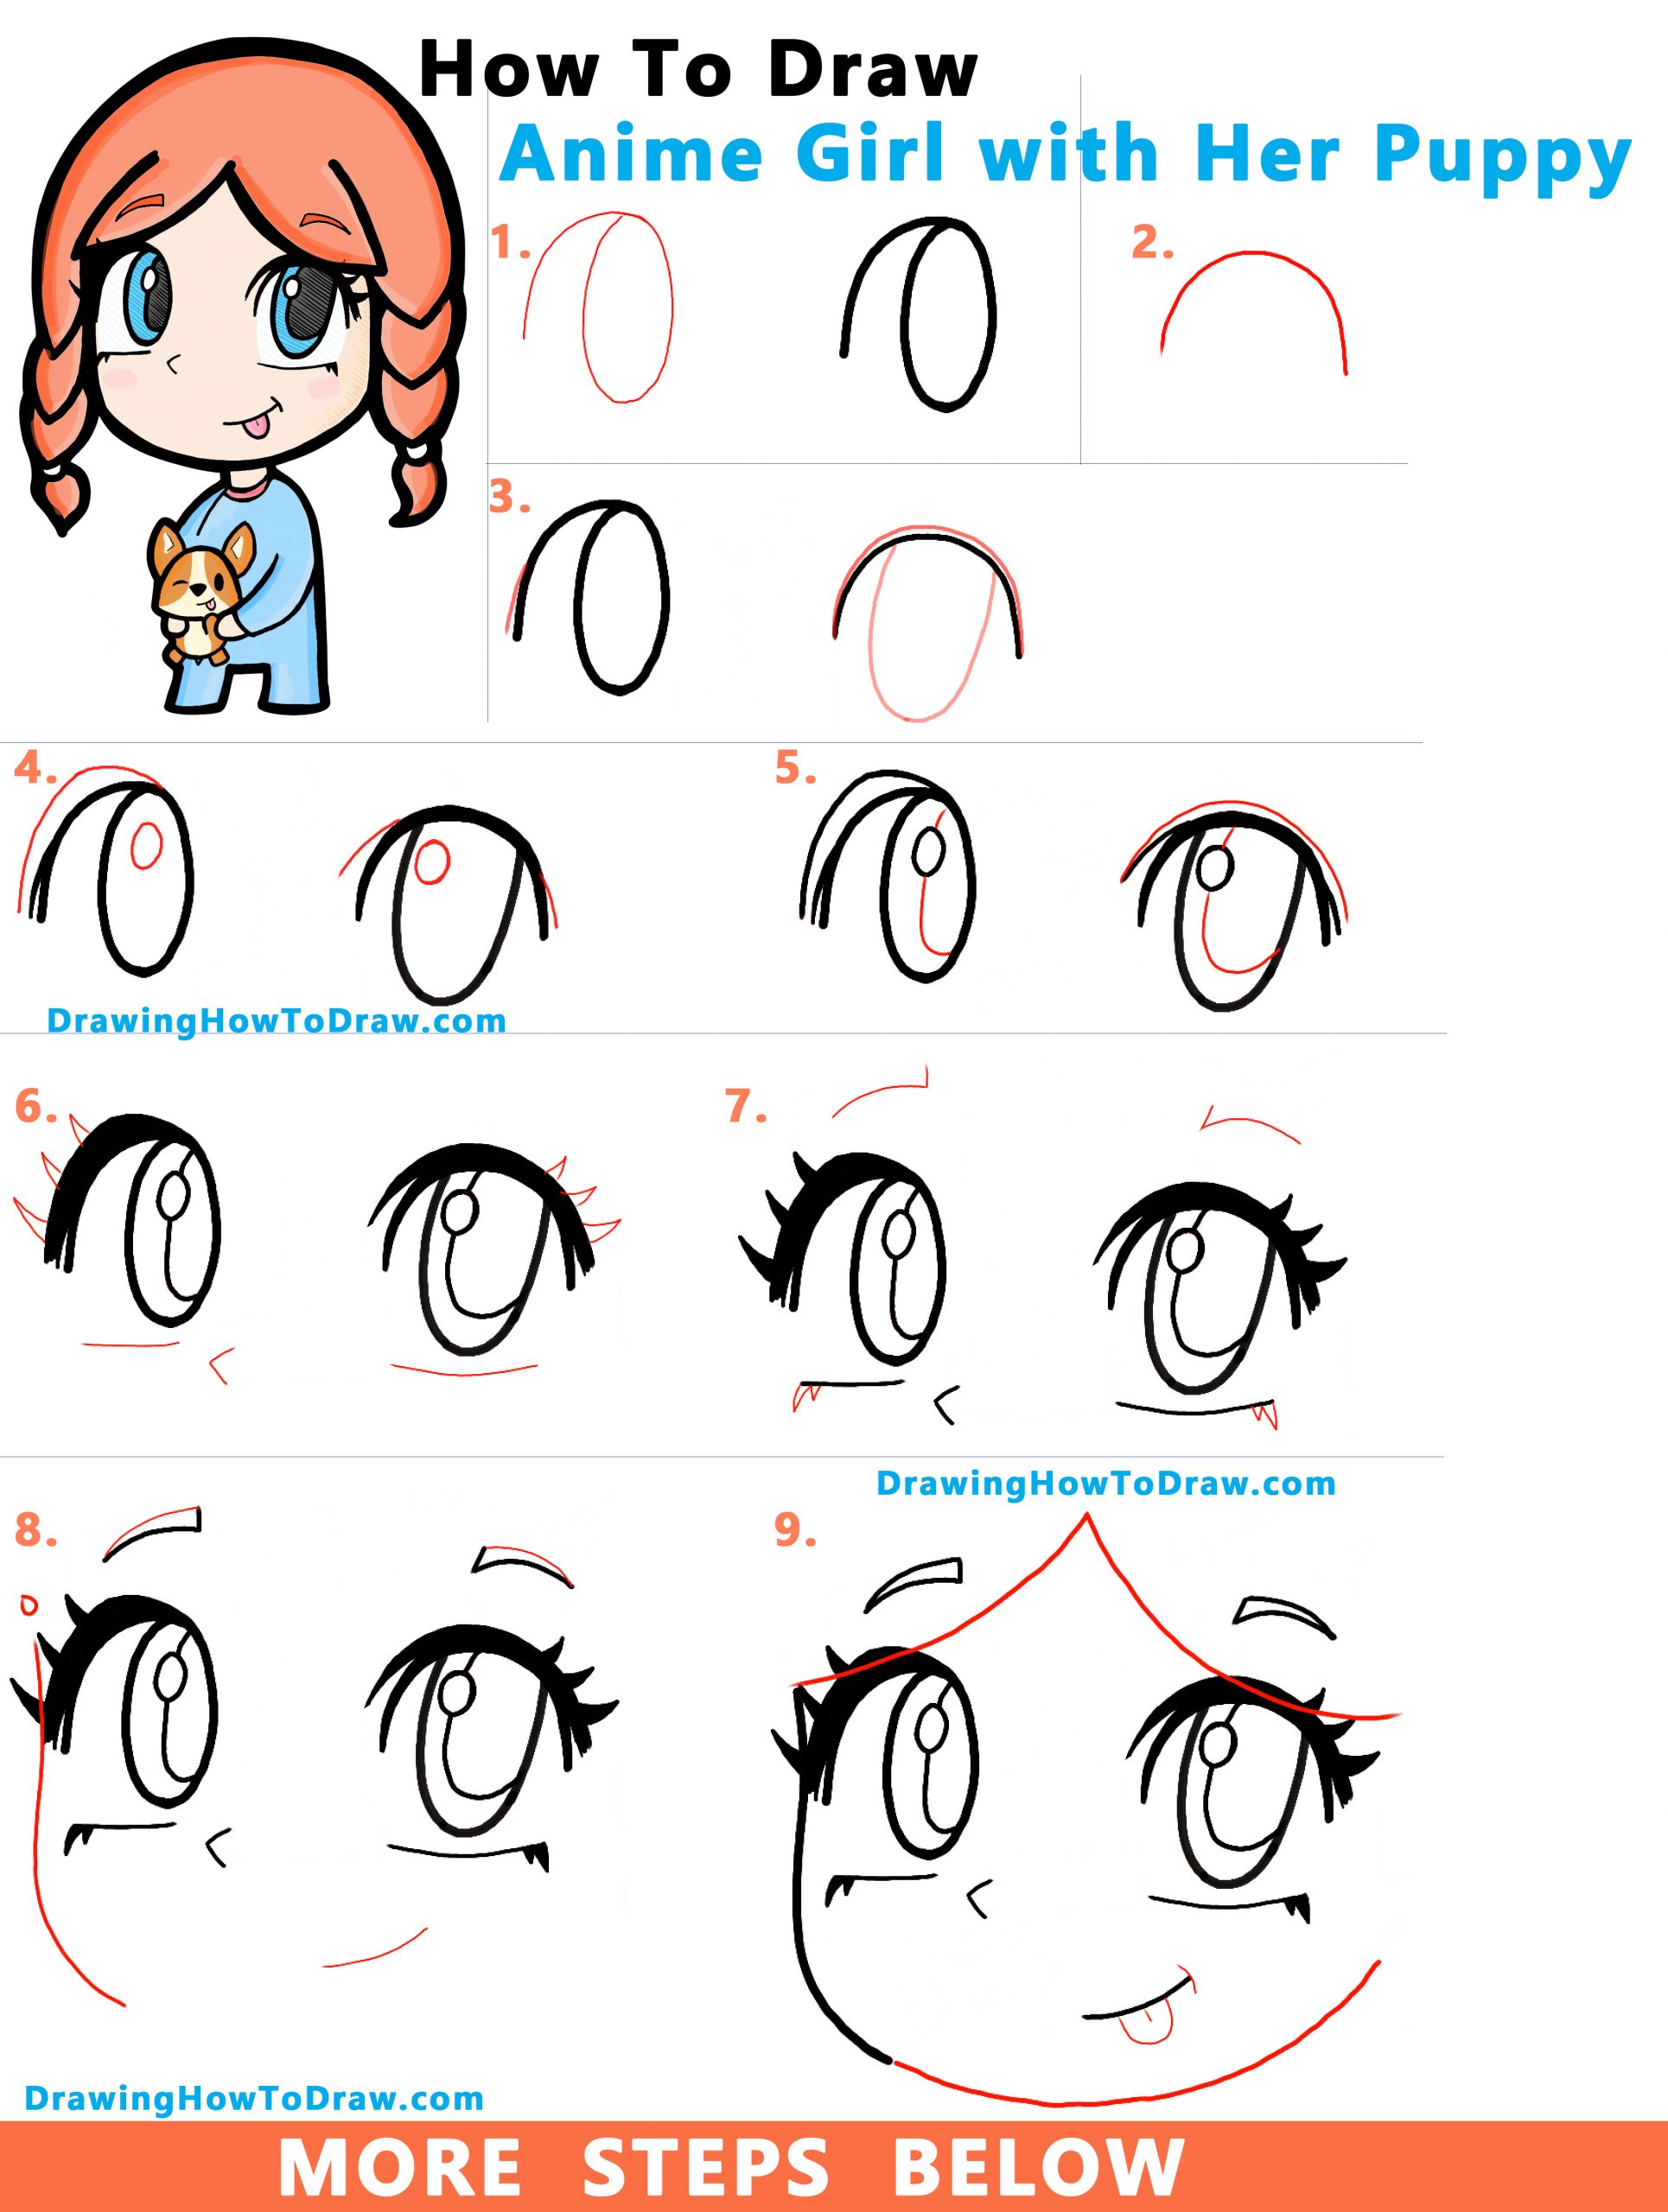 How to Draw Anime / Manga / Chibi Girl with her Corgi Puppy - How to Draw  Step by Step Drawing Tutorials